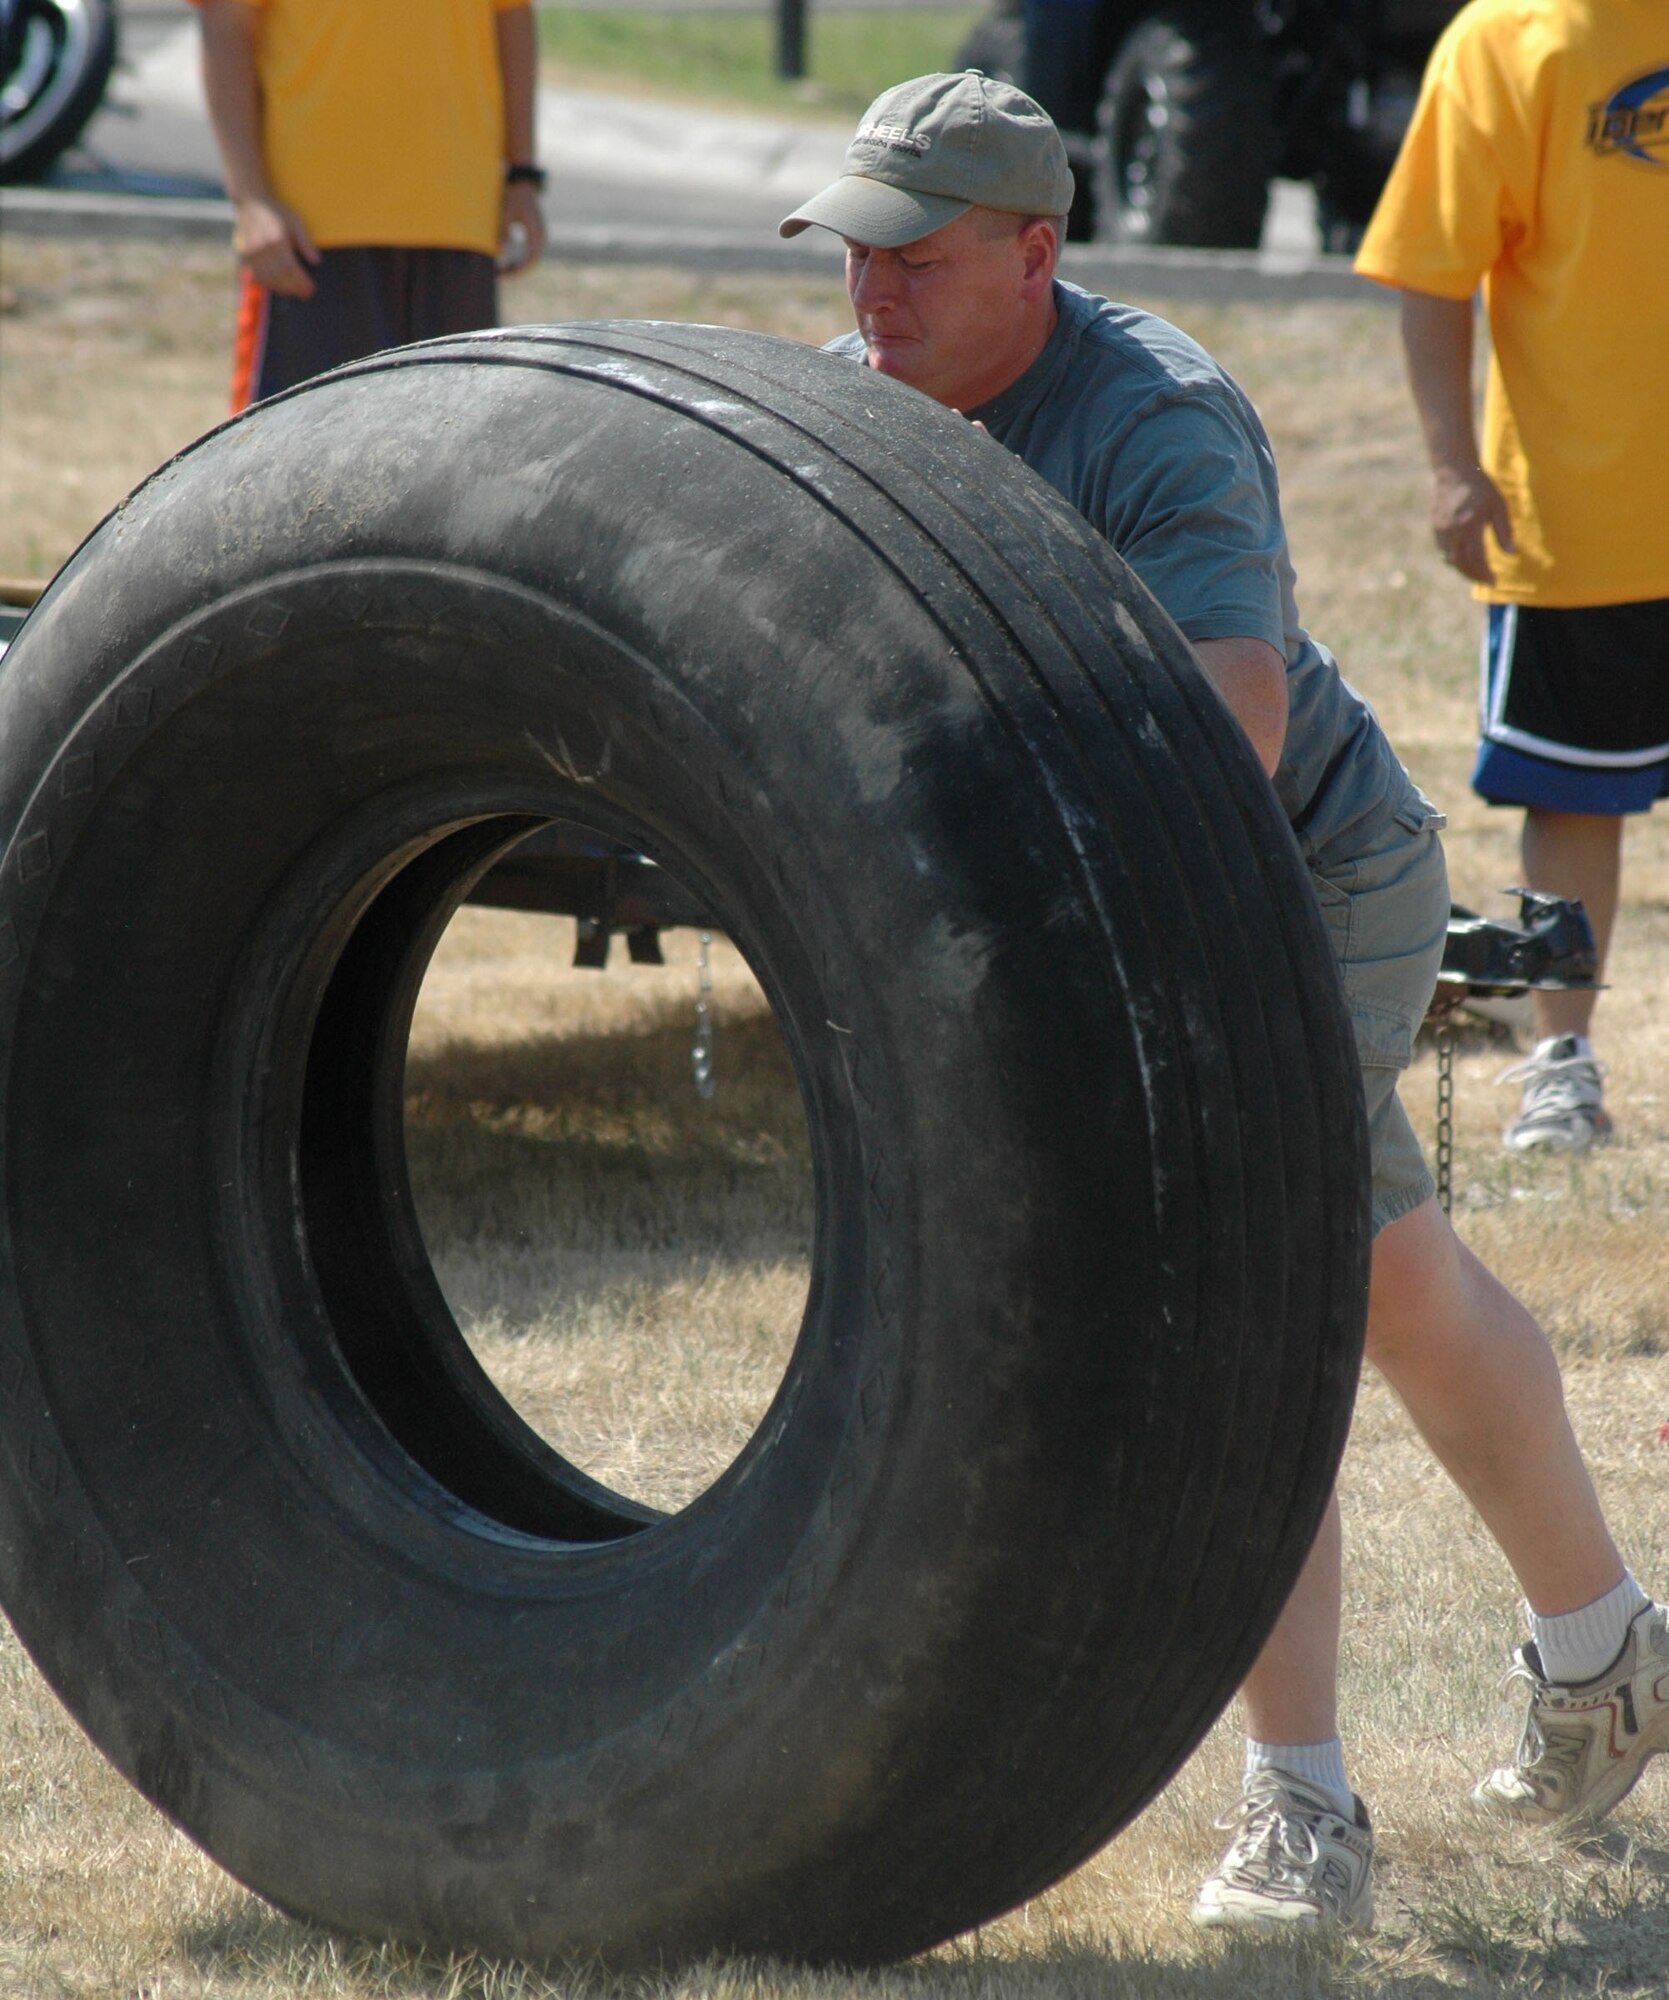 Master Sgt. Nathan Brett, 341st Security Forces Squadron weapons system superintendent, flips a tire in the Grizzly Challenge Competition during the "Cruisin' the Summer" base picnic July 27. More than 2,500 people attended the free, annual barbeque at Malmstrom Air Force Base, Mont. (U.S. Air Force photo/Airman 1st Class Dillon White).